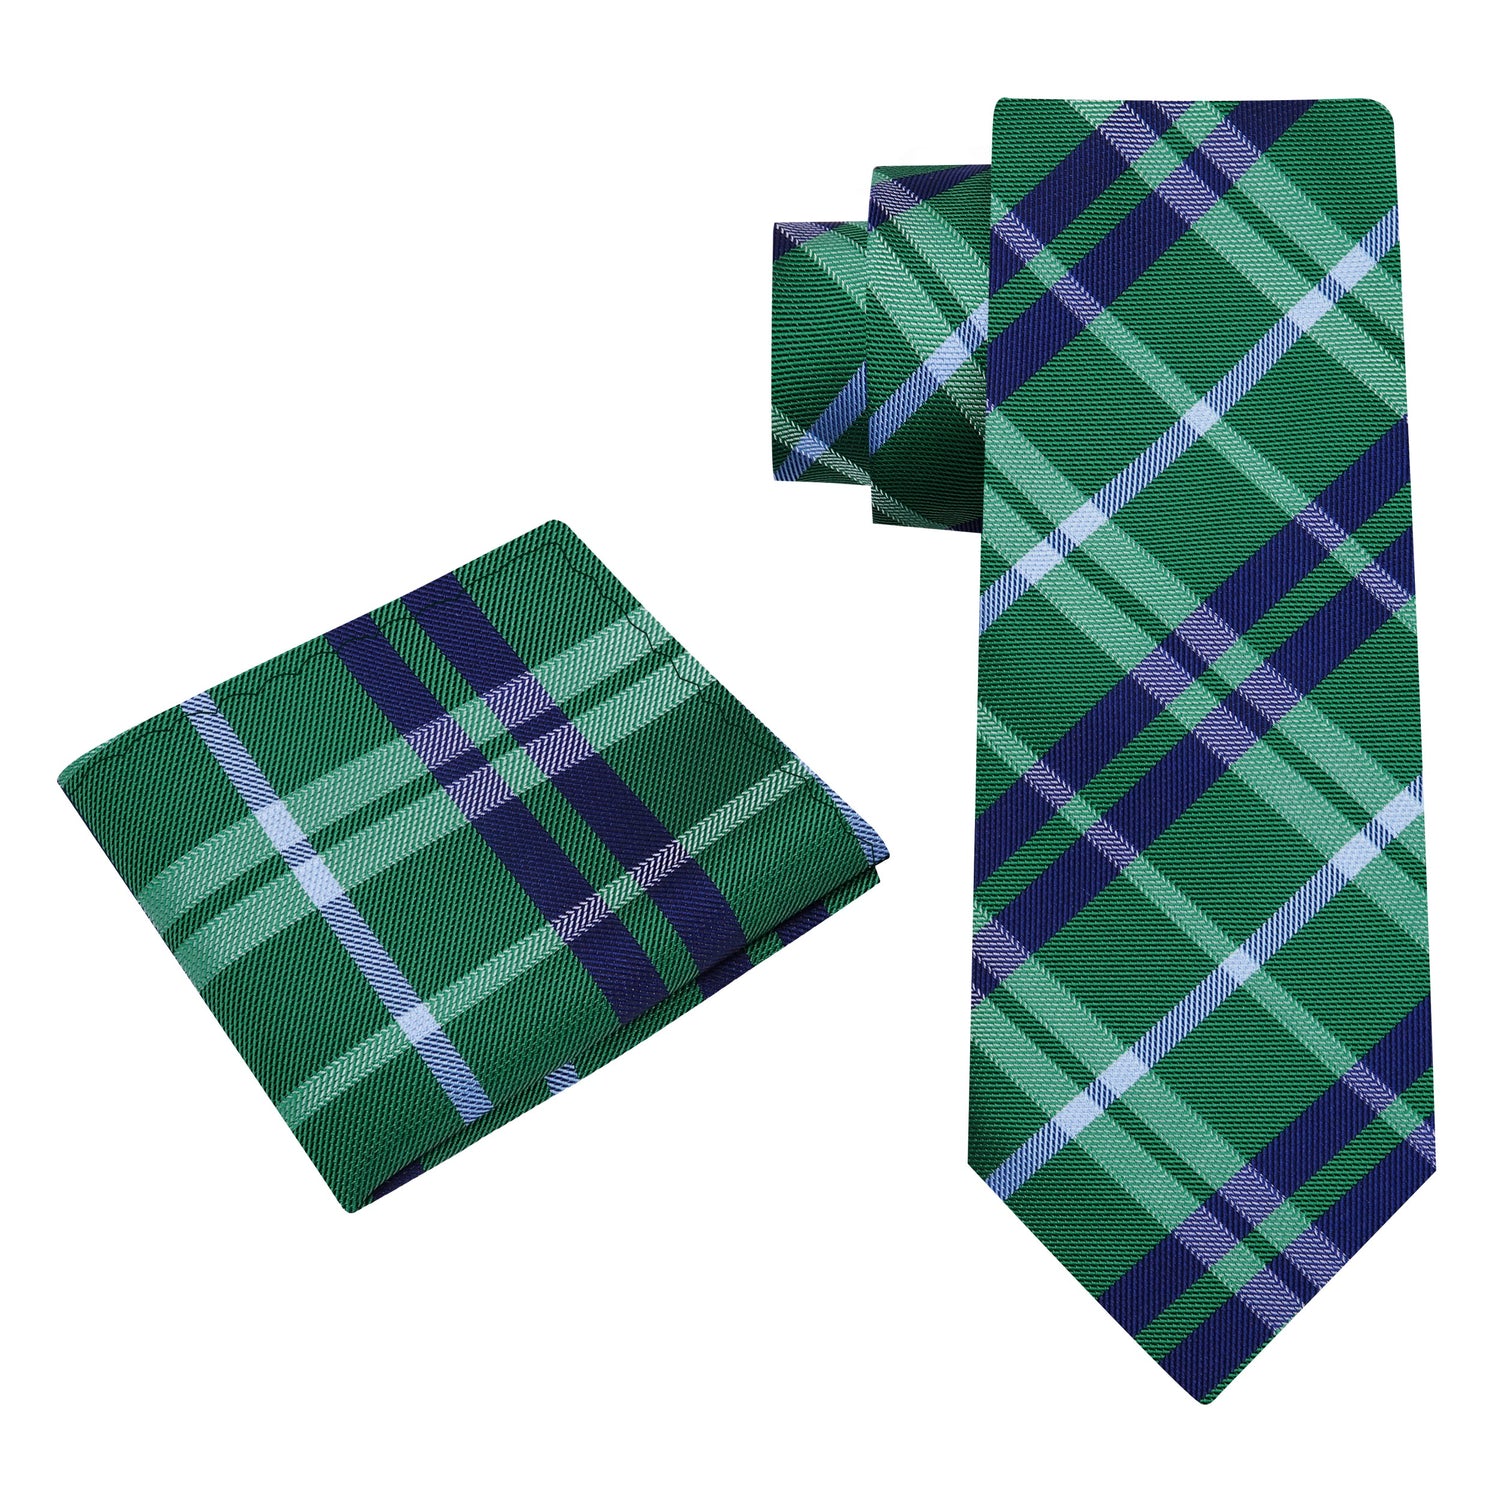 Alt View: Green and Blue Plaid Tie and Matching Square